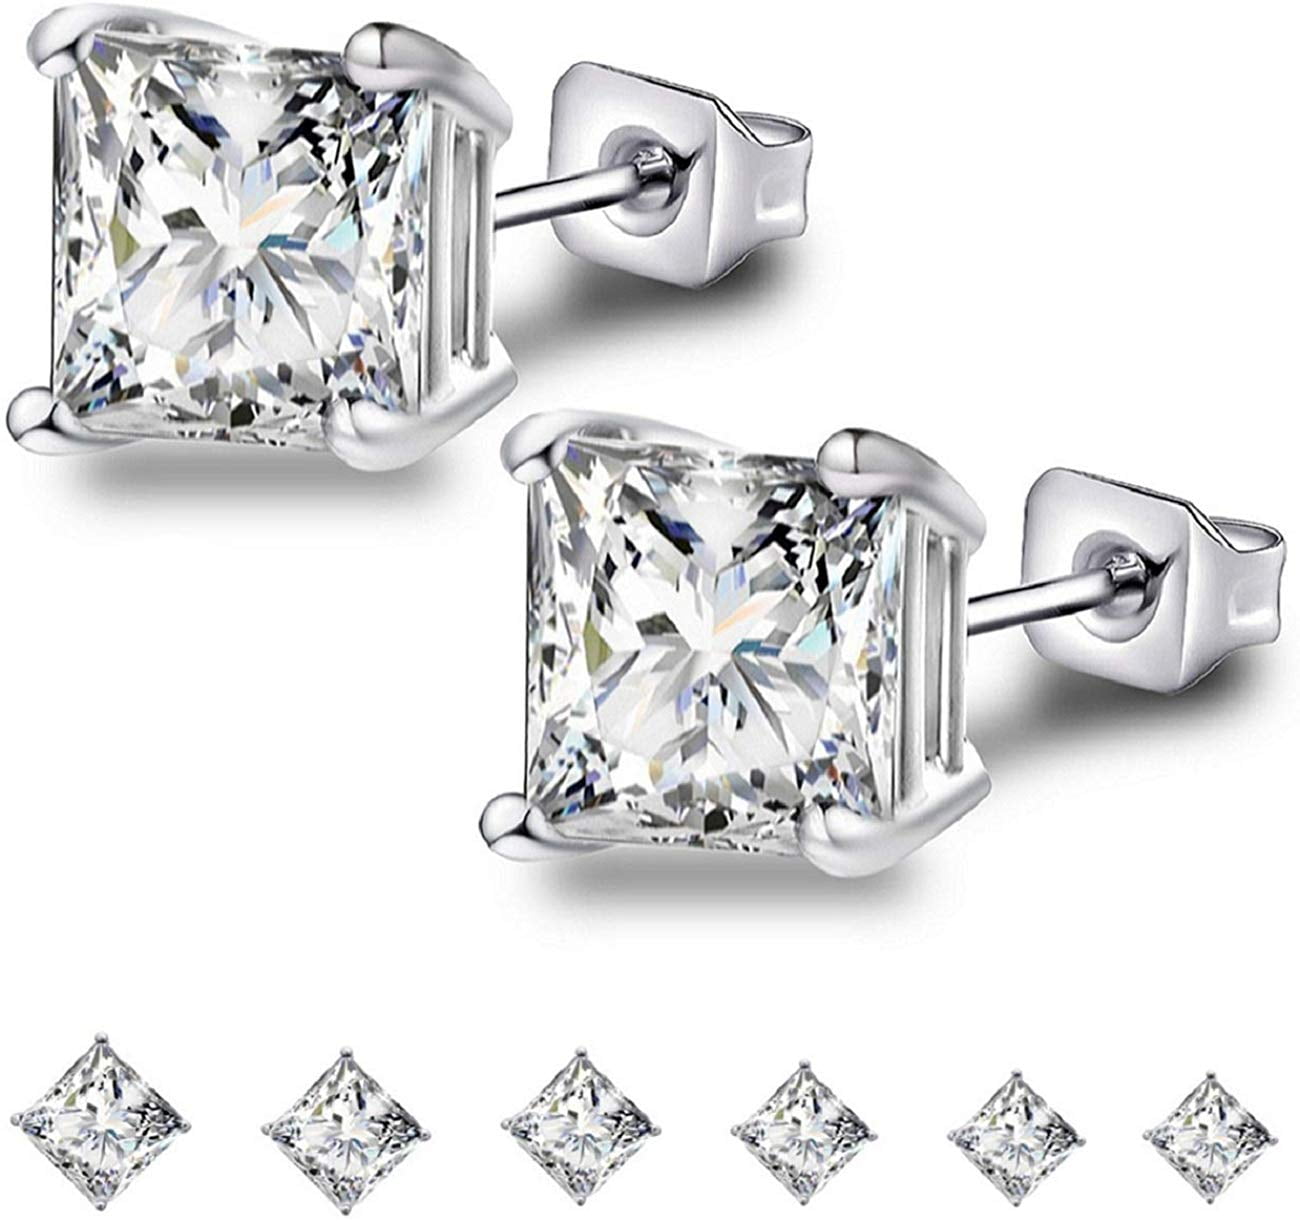 Womens Sterling Silver 925 Rhodium Plated Square Clear CZ 5mm Stud Earrings 